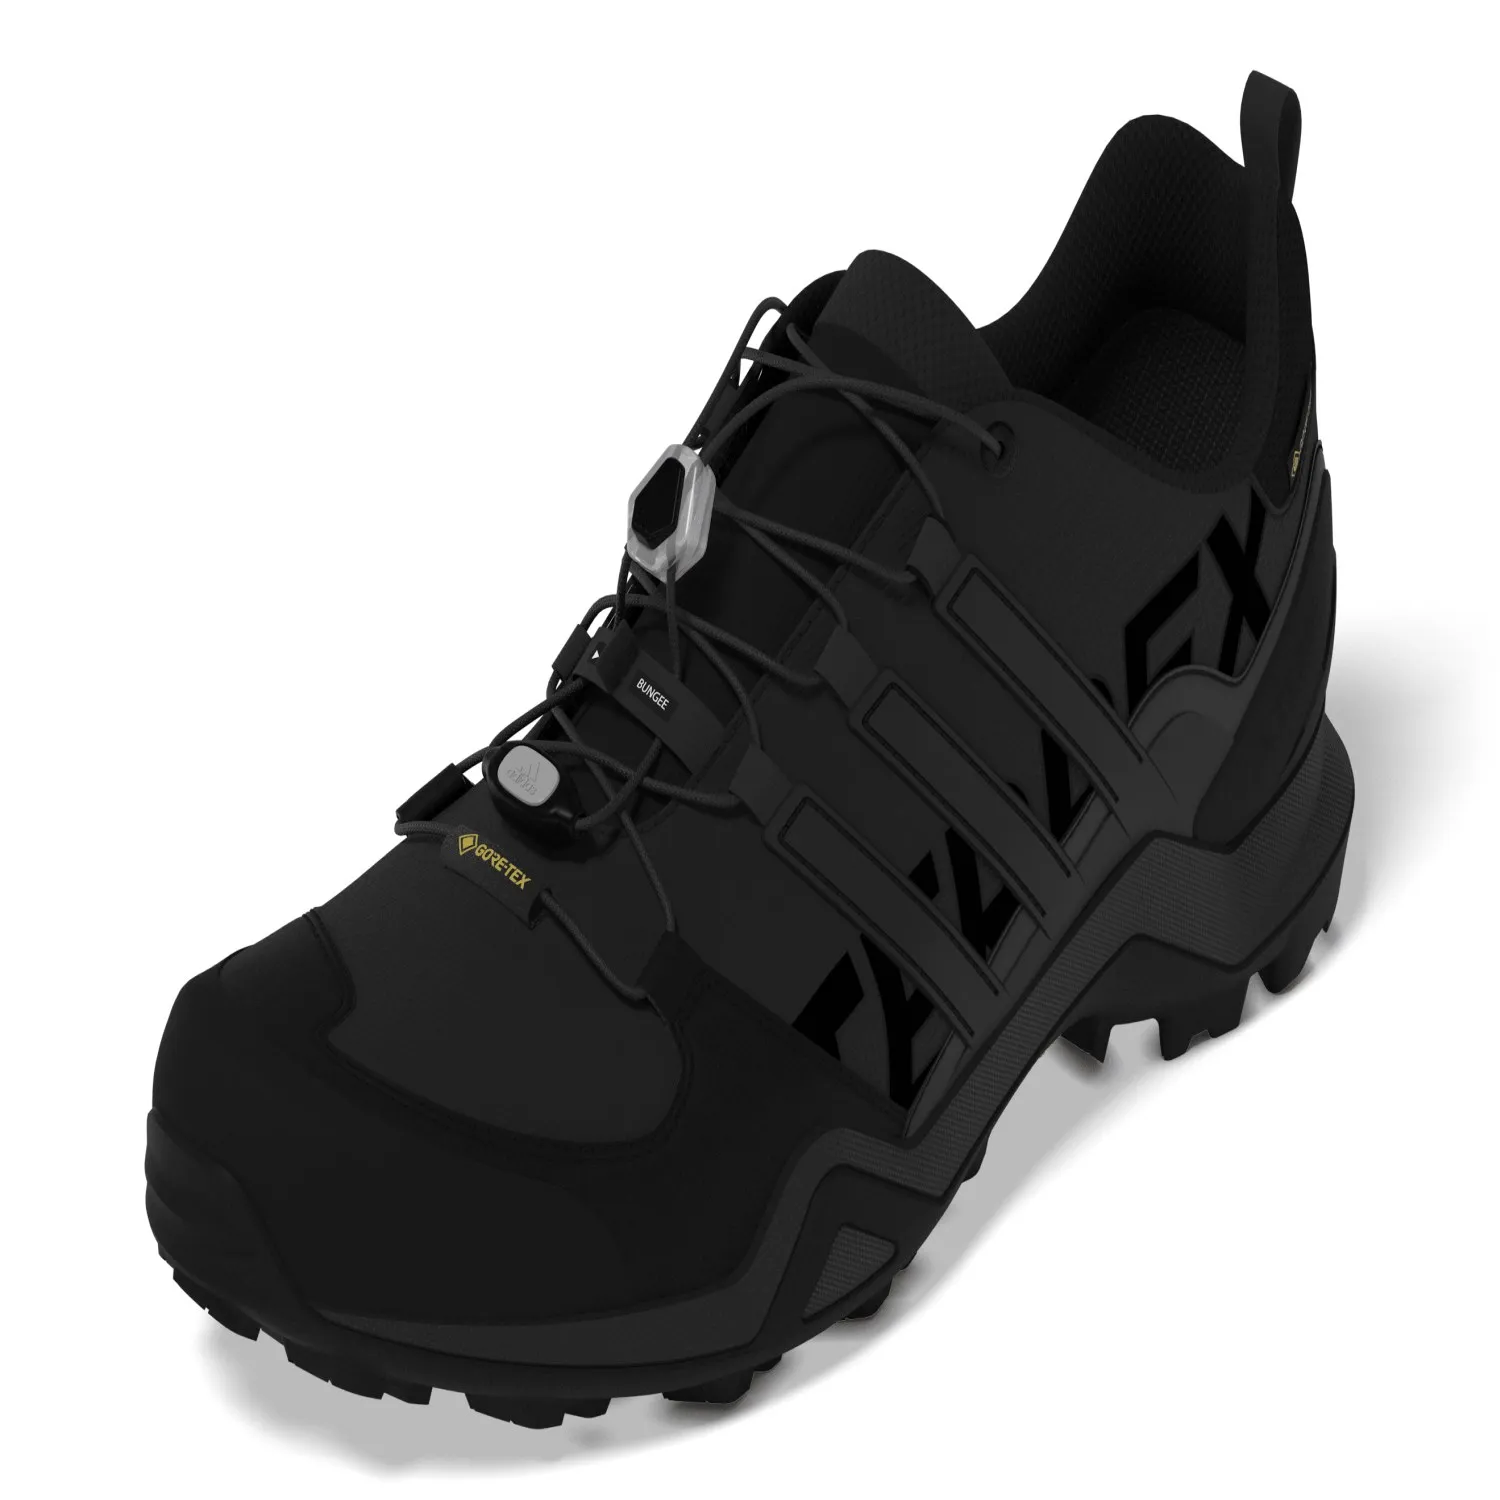 IF7631_13_FOOTWEAR_3D - Rendering_Side Lateral Left View_white.jpg